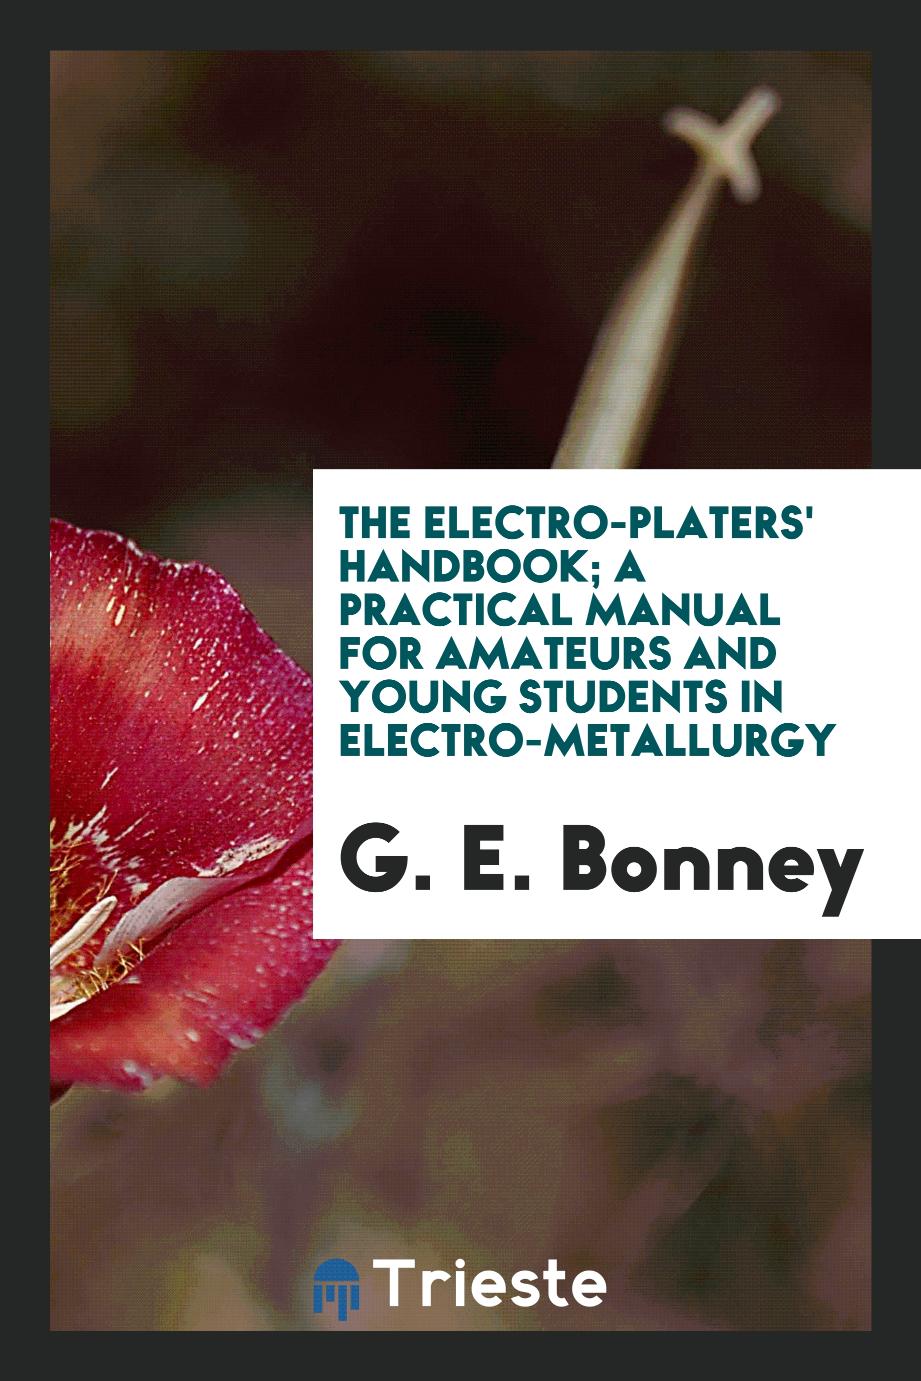 The electro-platers' handbook; a practical manual for amateurs and young students in electro-metallurgy